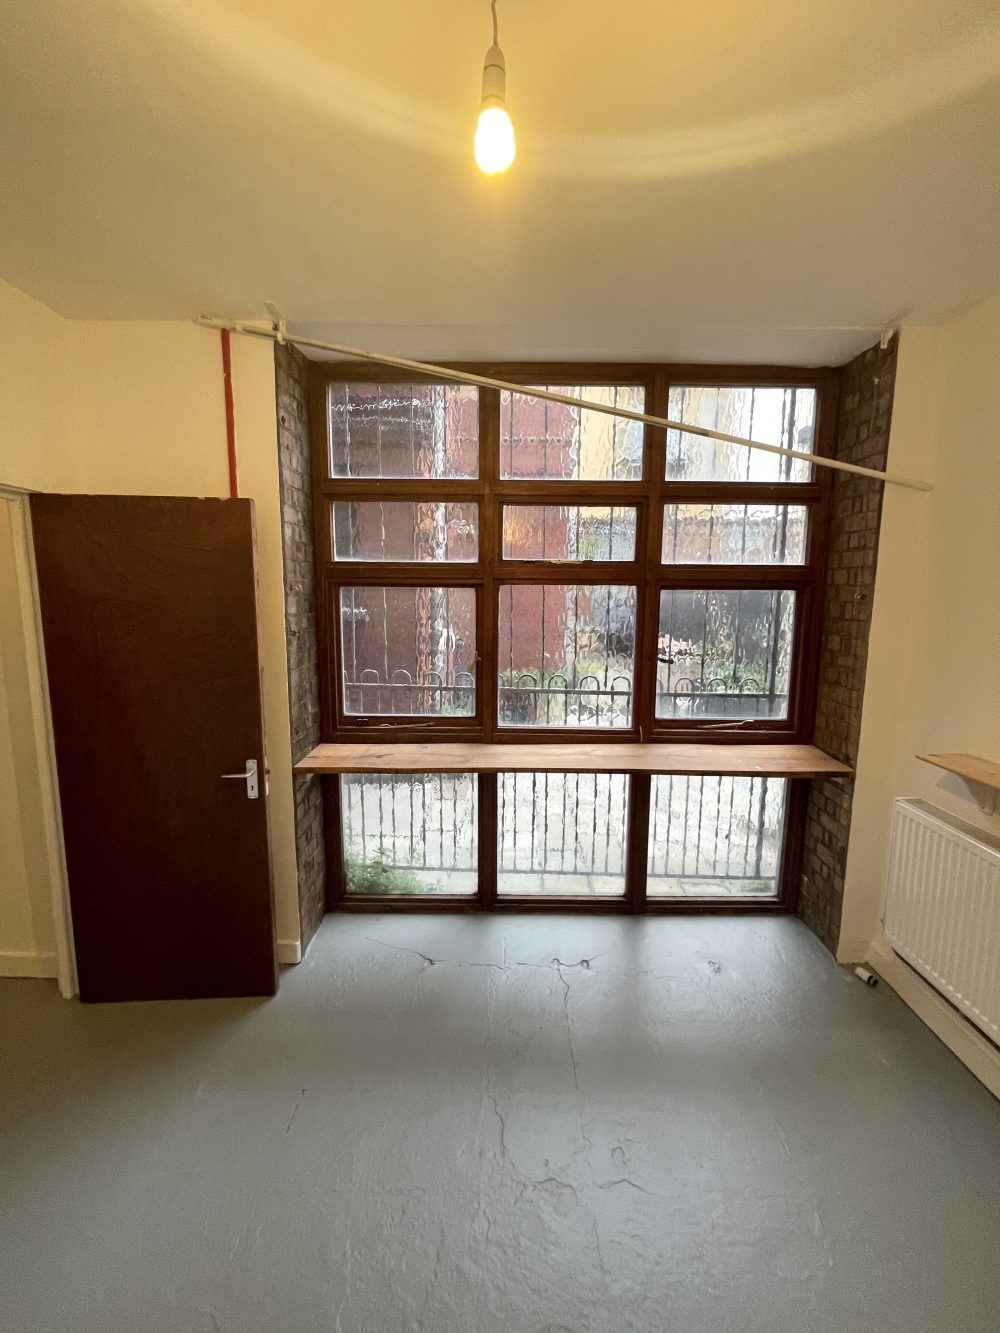 2 Bedroom Flat Available to rent in E9 London Fields Enterprise House Pic22